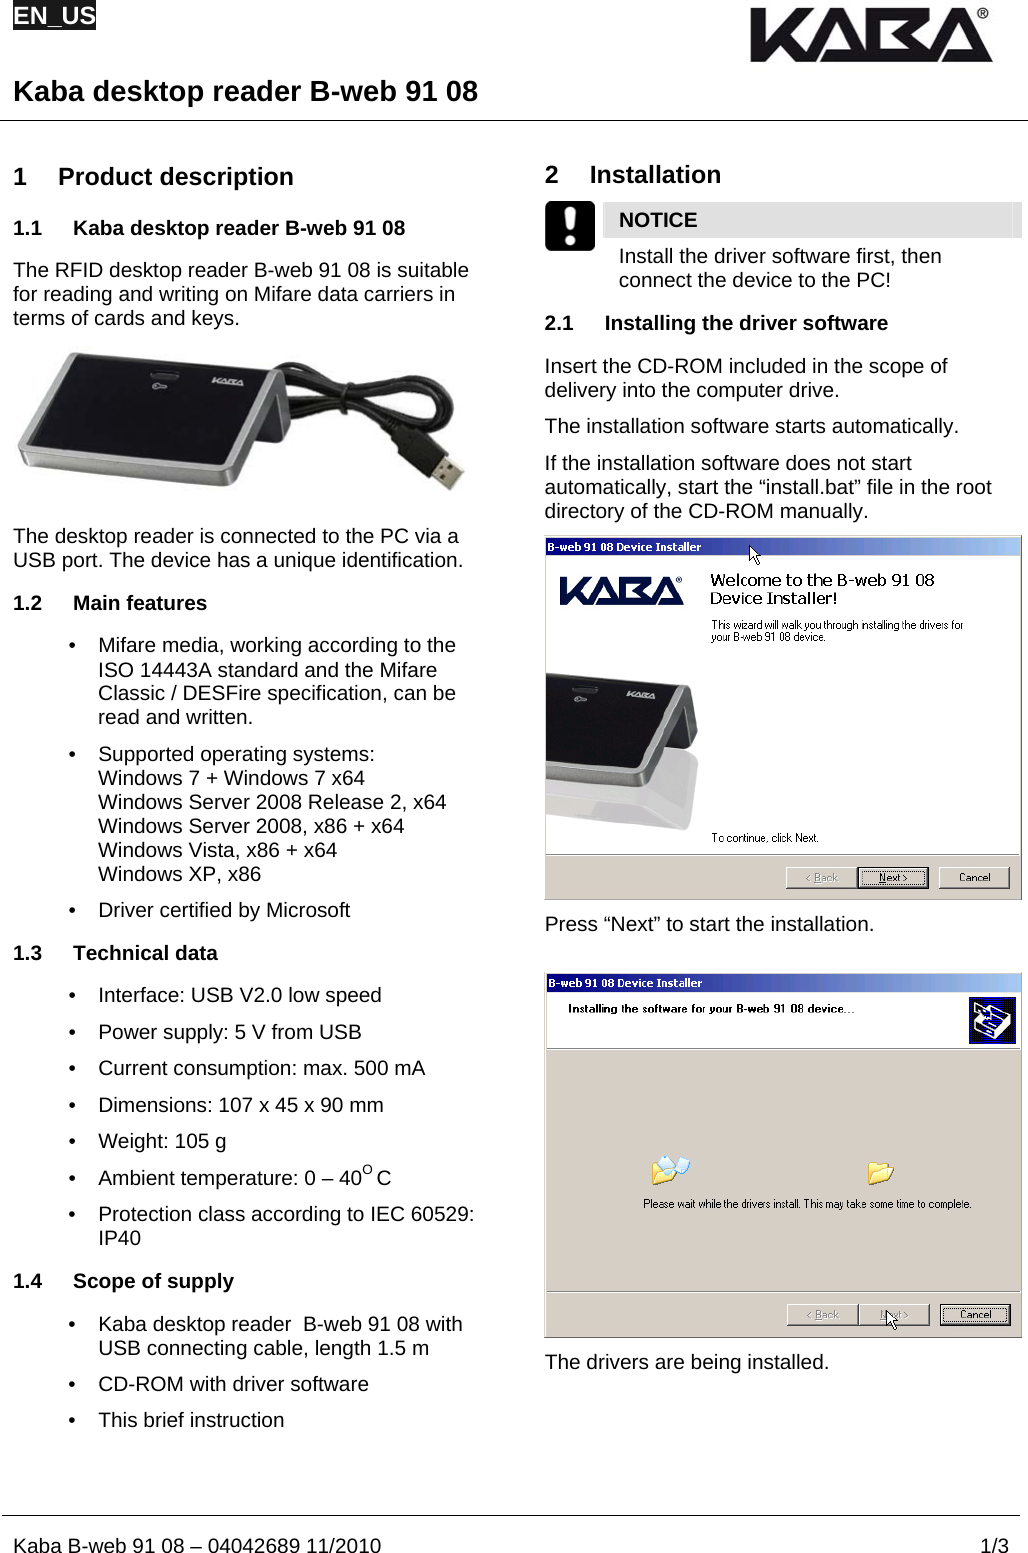 EN_US  Kaba desktop reader B-web 91 08  Kaba B-web 91 08 – 04042689 11/2010  1/3P  os: 1 /Modul-Kapitel/ Produktbeschrei bung/Beschreibung/ B-web/B-web 91 08 - FCC/USA @ 7\ mod_1289924378827_2. doc @ 31016 @  1 Product description 1.1  Kaba desktop reader B-web 91 08 The RFID desktop reader B-web 91 08 is suitable for reading and writing on Mifare data carriers in terms of cards and keys.  The desktop reader is connected to the PC via a USB port. The device has a unique identification. 1.2 Main features •  Mifare media, working according to the ISO 14443A standard and the Mifare Classic / DESFire specification, can be read and written. •  Supported operating systems:  Windows 7 + Windows 7 x64 Windows Server 2008 Release 2, x64 Windows Server 2008, x86 + x64 Windows Vista, x86 + x64 Windows XP, x86 •  Driver certified by Microsoft 1.3 Technical data •  Interface: USB V2.0 low speed •  Power supply: 5 V from USB •  Current consumption: max. 500 mA •  Dimensions: 107 x 45 x 90 mm •  Weight: 105 g •  Ambient temperature: 0 – 40O C •  Protection class according to IEC 60529: IP40 1.4  Scope of supply •  Kaba desktop reader  B-web 91 08 with USB connecting cable, length 1.5 m •  CD-ROM with driver software •  This brief instruction   2 Installation  NOTICE   Install the driver software first, then   connect the device to the PC!  2.1  Installing the driver software Insert the CD-ROM included in the scope of delivery into the computer drive. The installation software starts automatically. If the installation software does not start automatically, start the “install.bat” file in the root directory of the CD-ROM manually.  Press “Next” to start the installation.   The drivers are being installed.   